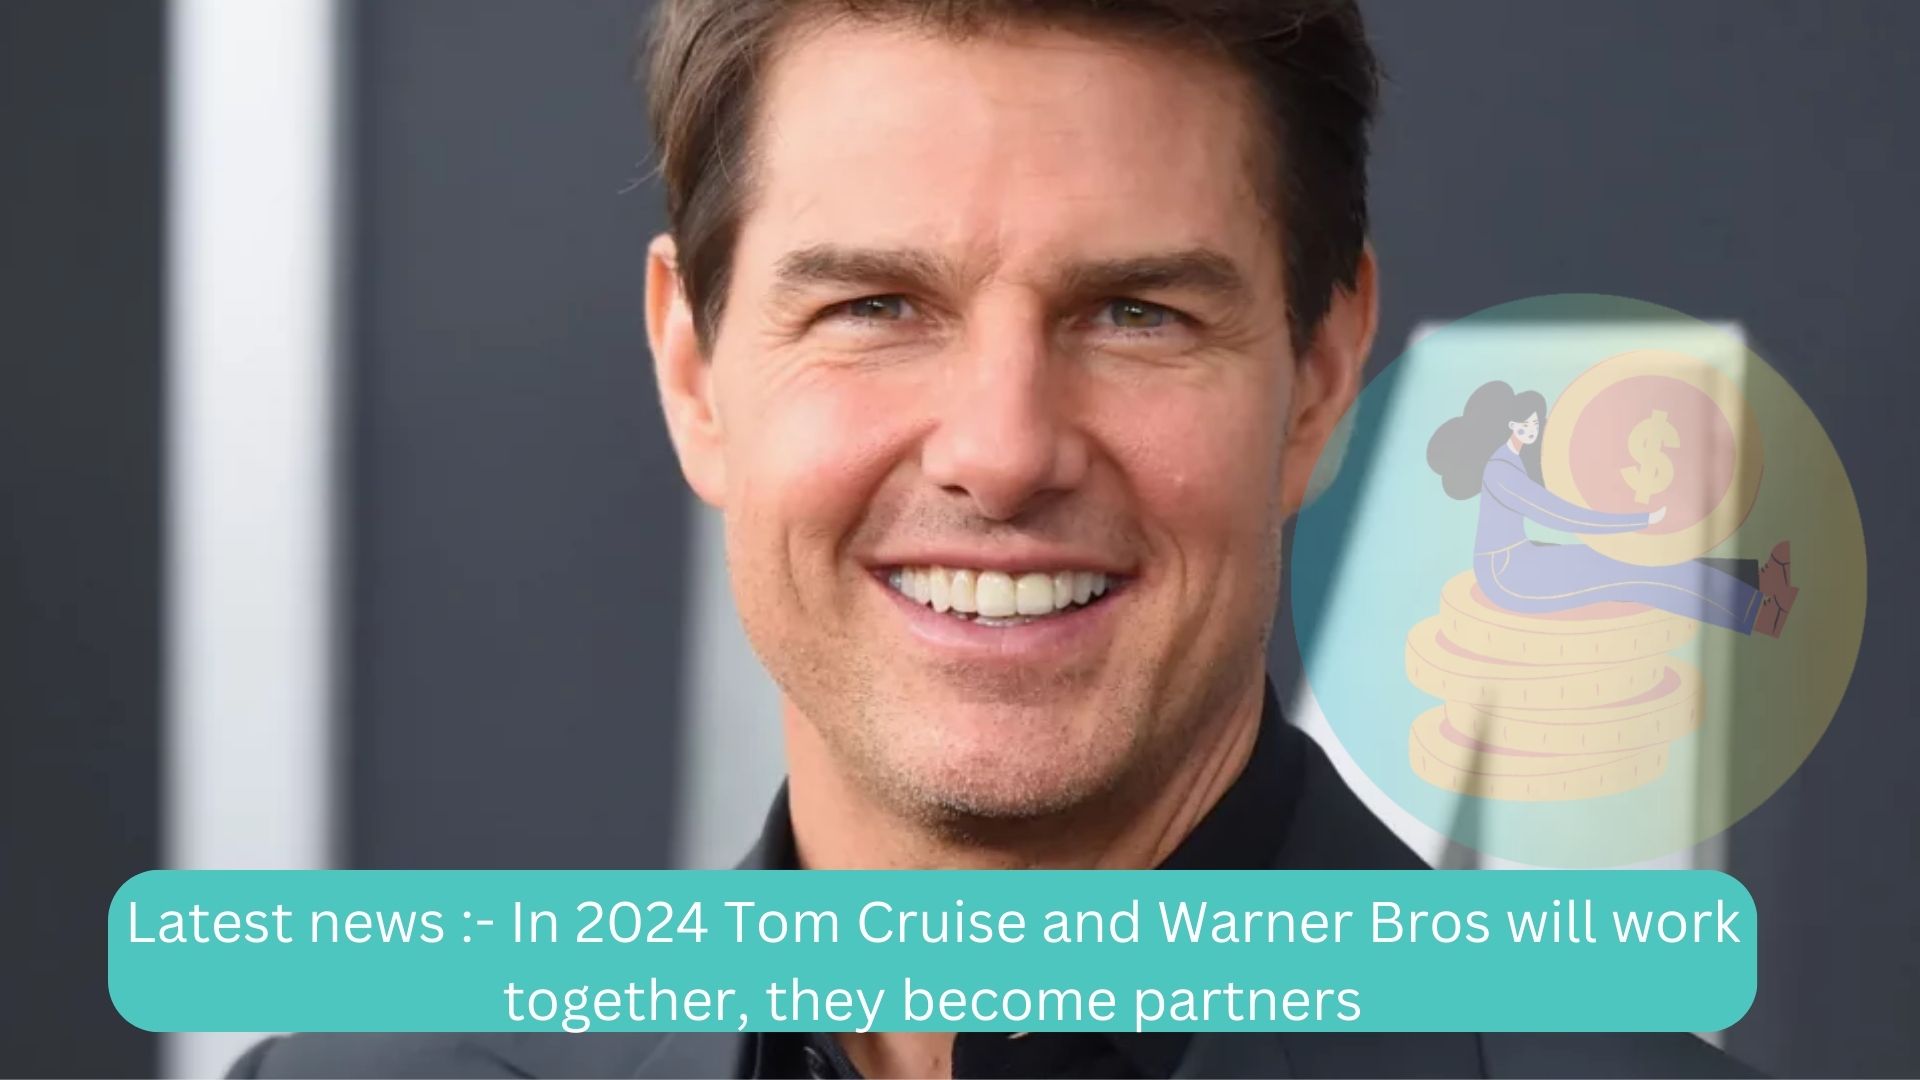 Tom Cruise and Warner Bros will work together 